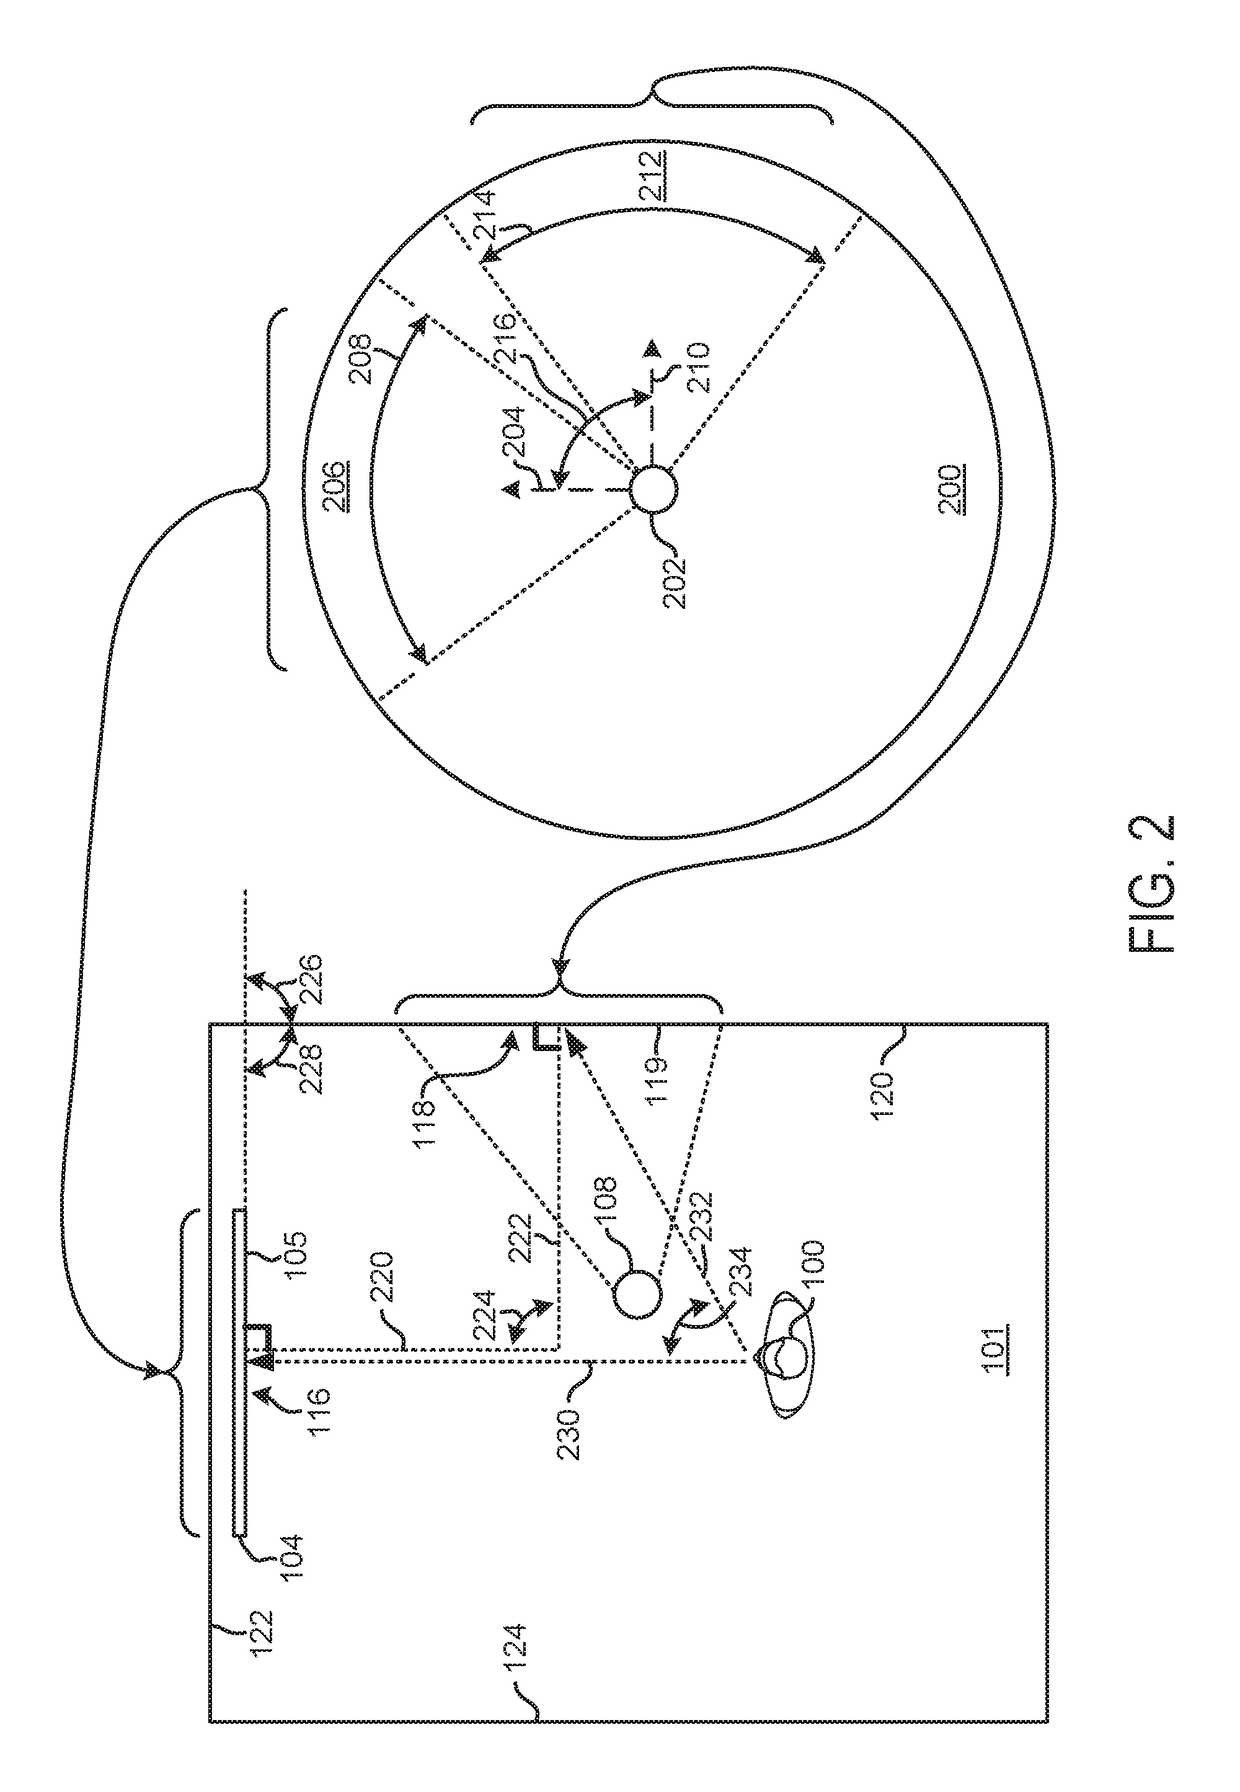 Spatially and user aware second screen projection from a companion robot or device